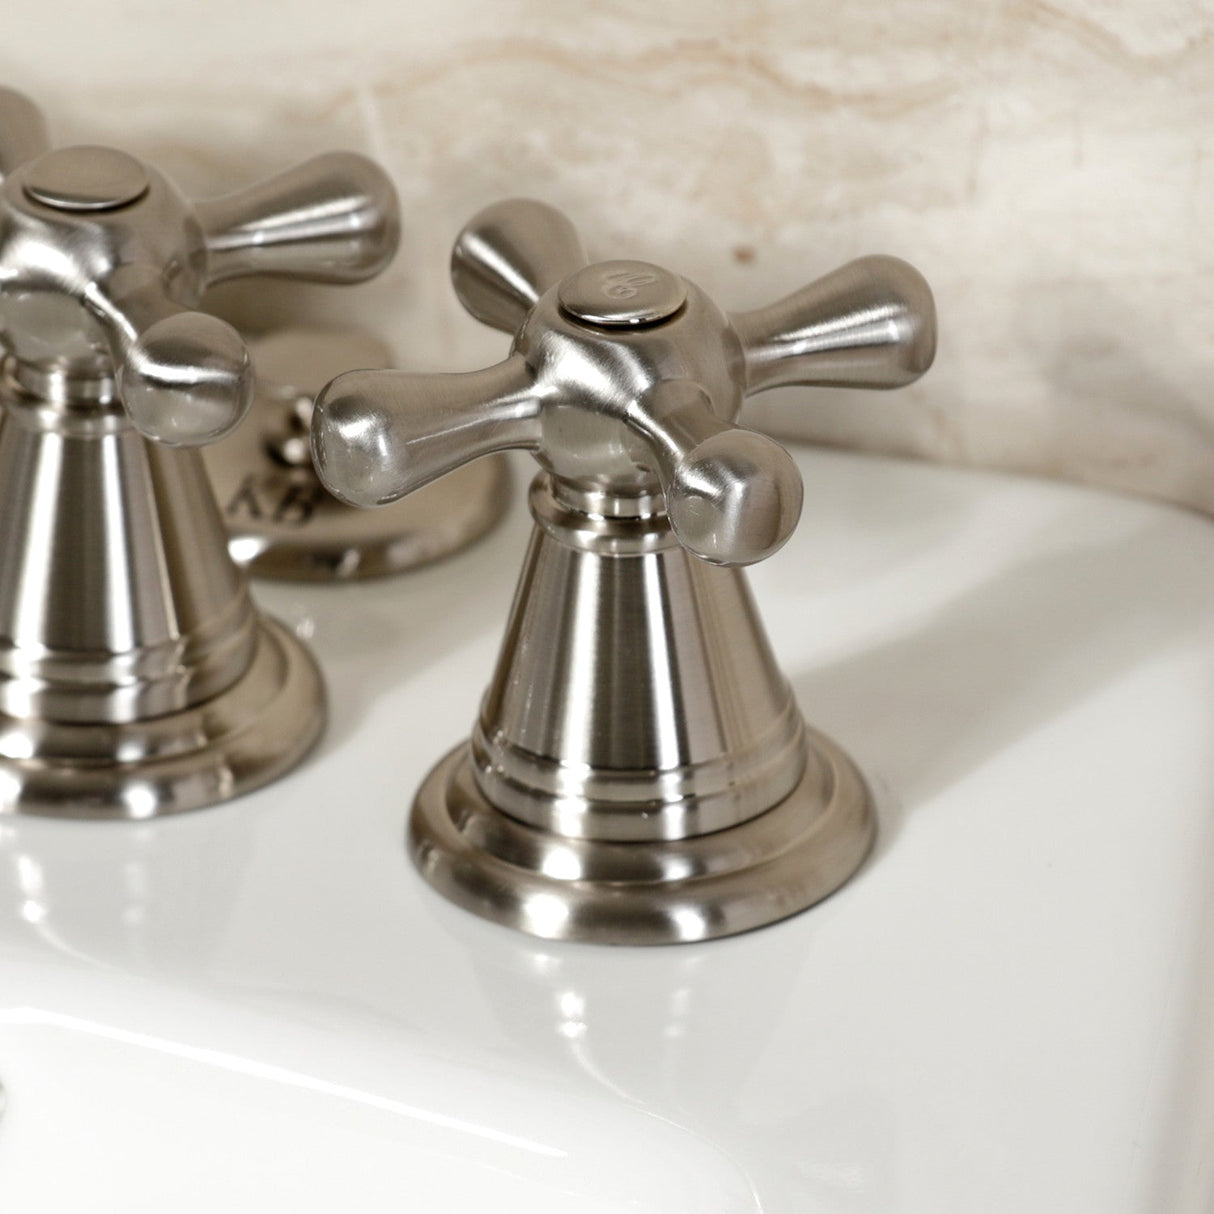 Victorian KB328AX Three-Handle Vertical Spray Bidet Faucet with Brass Pop-Up, Brushed Nickel